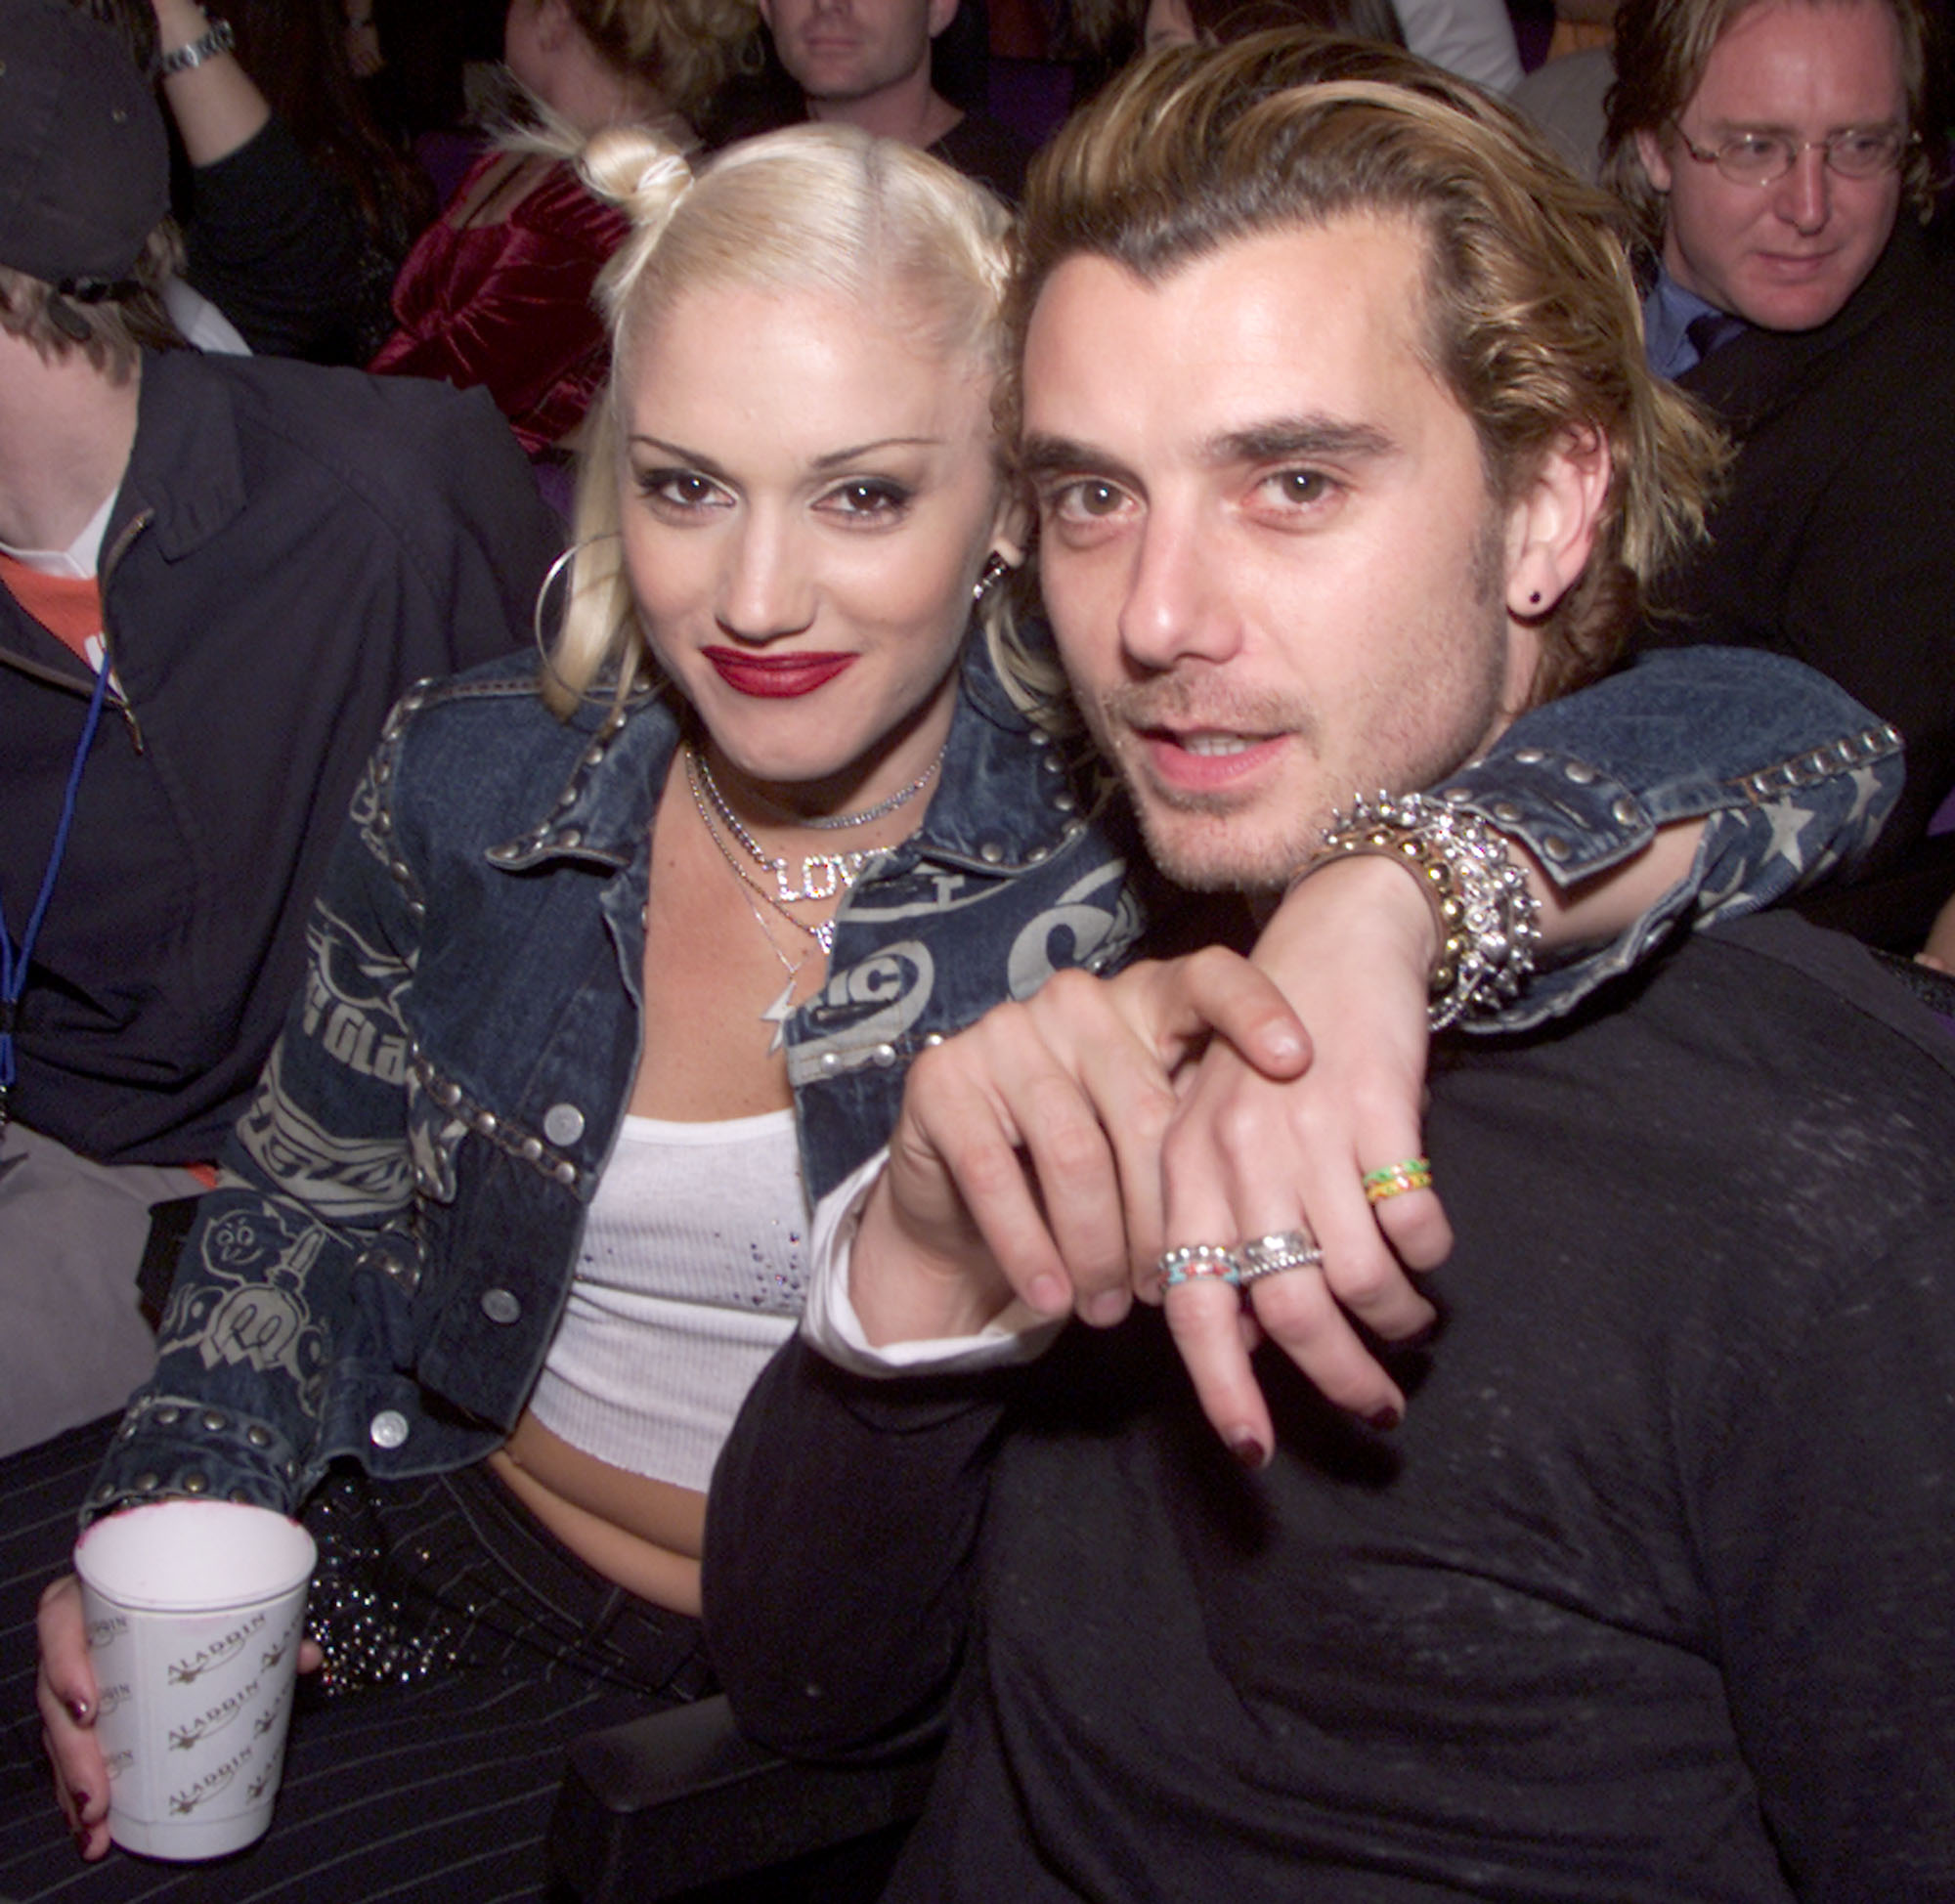 Gwen Stefani and Gavin Rossdale at the Radio Music Awards in Las Vegas in 2000 | Source: Getty Images